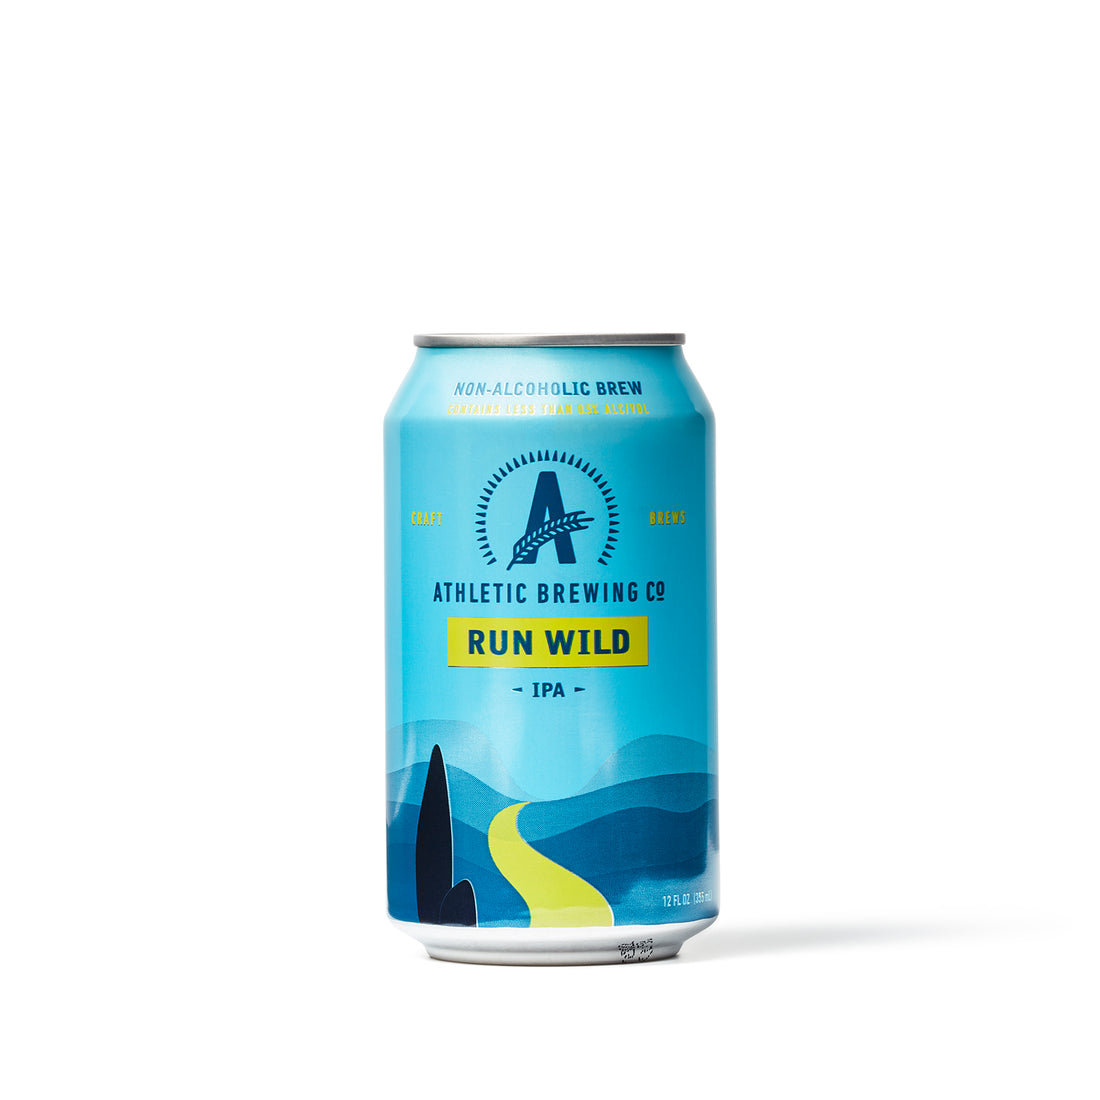 Athletic Brewing - Run Wild IPA - Non-Alcoholic Beer - 6 pack - Boisson — Brooklyn's Non-Alcoholic Spirits, Beer, Wine, and Home Bar Shop in Cobble Hill